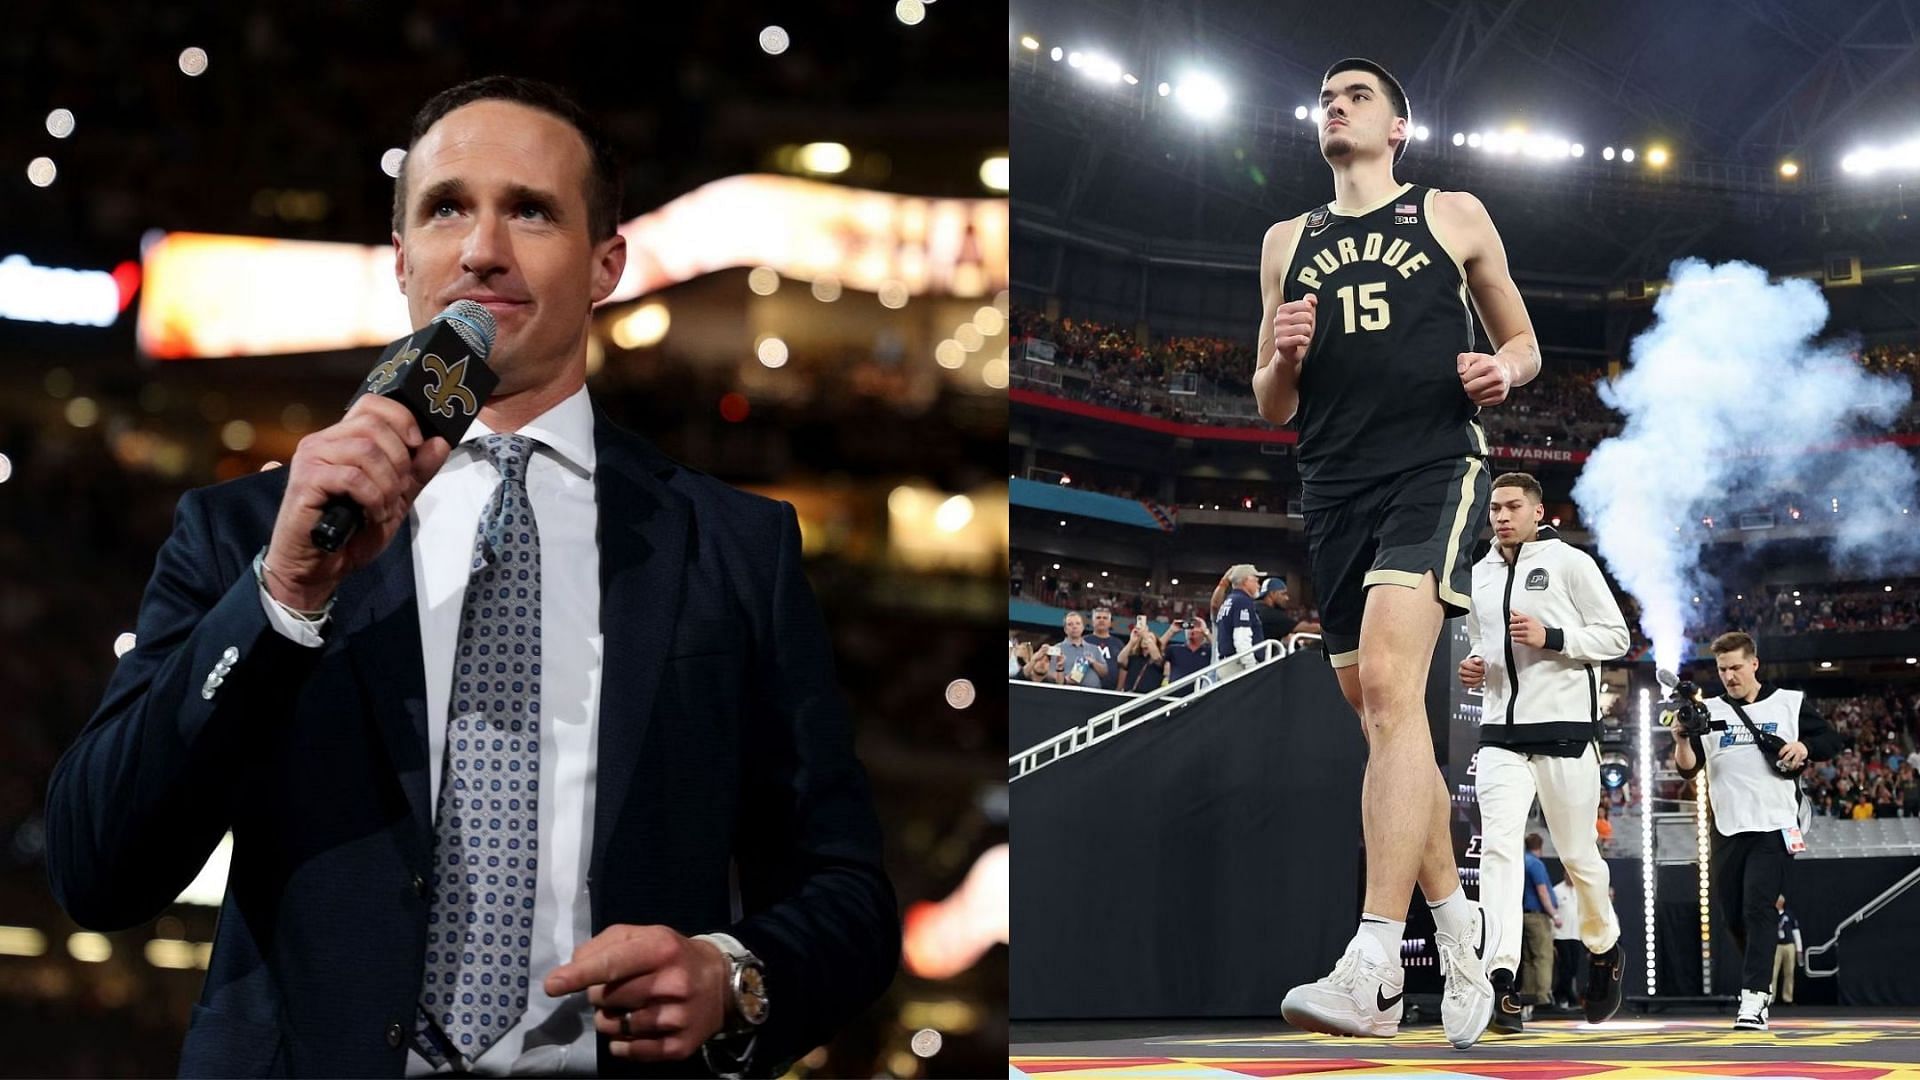 Drew Brees supports Purdue in the NCAA men